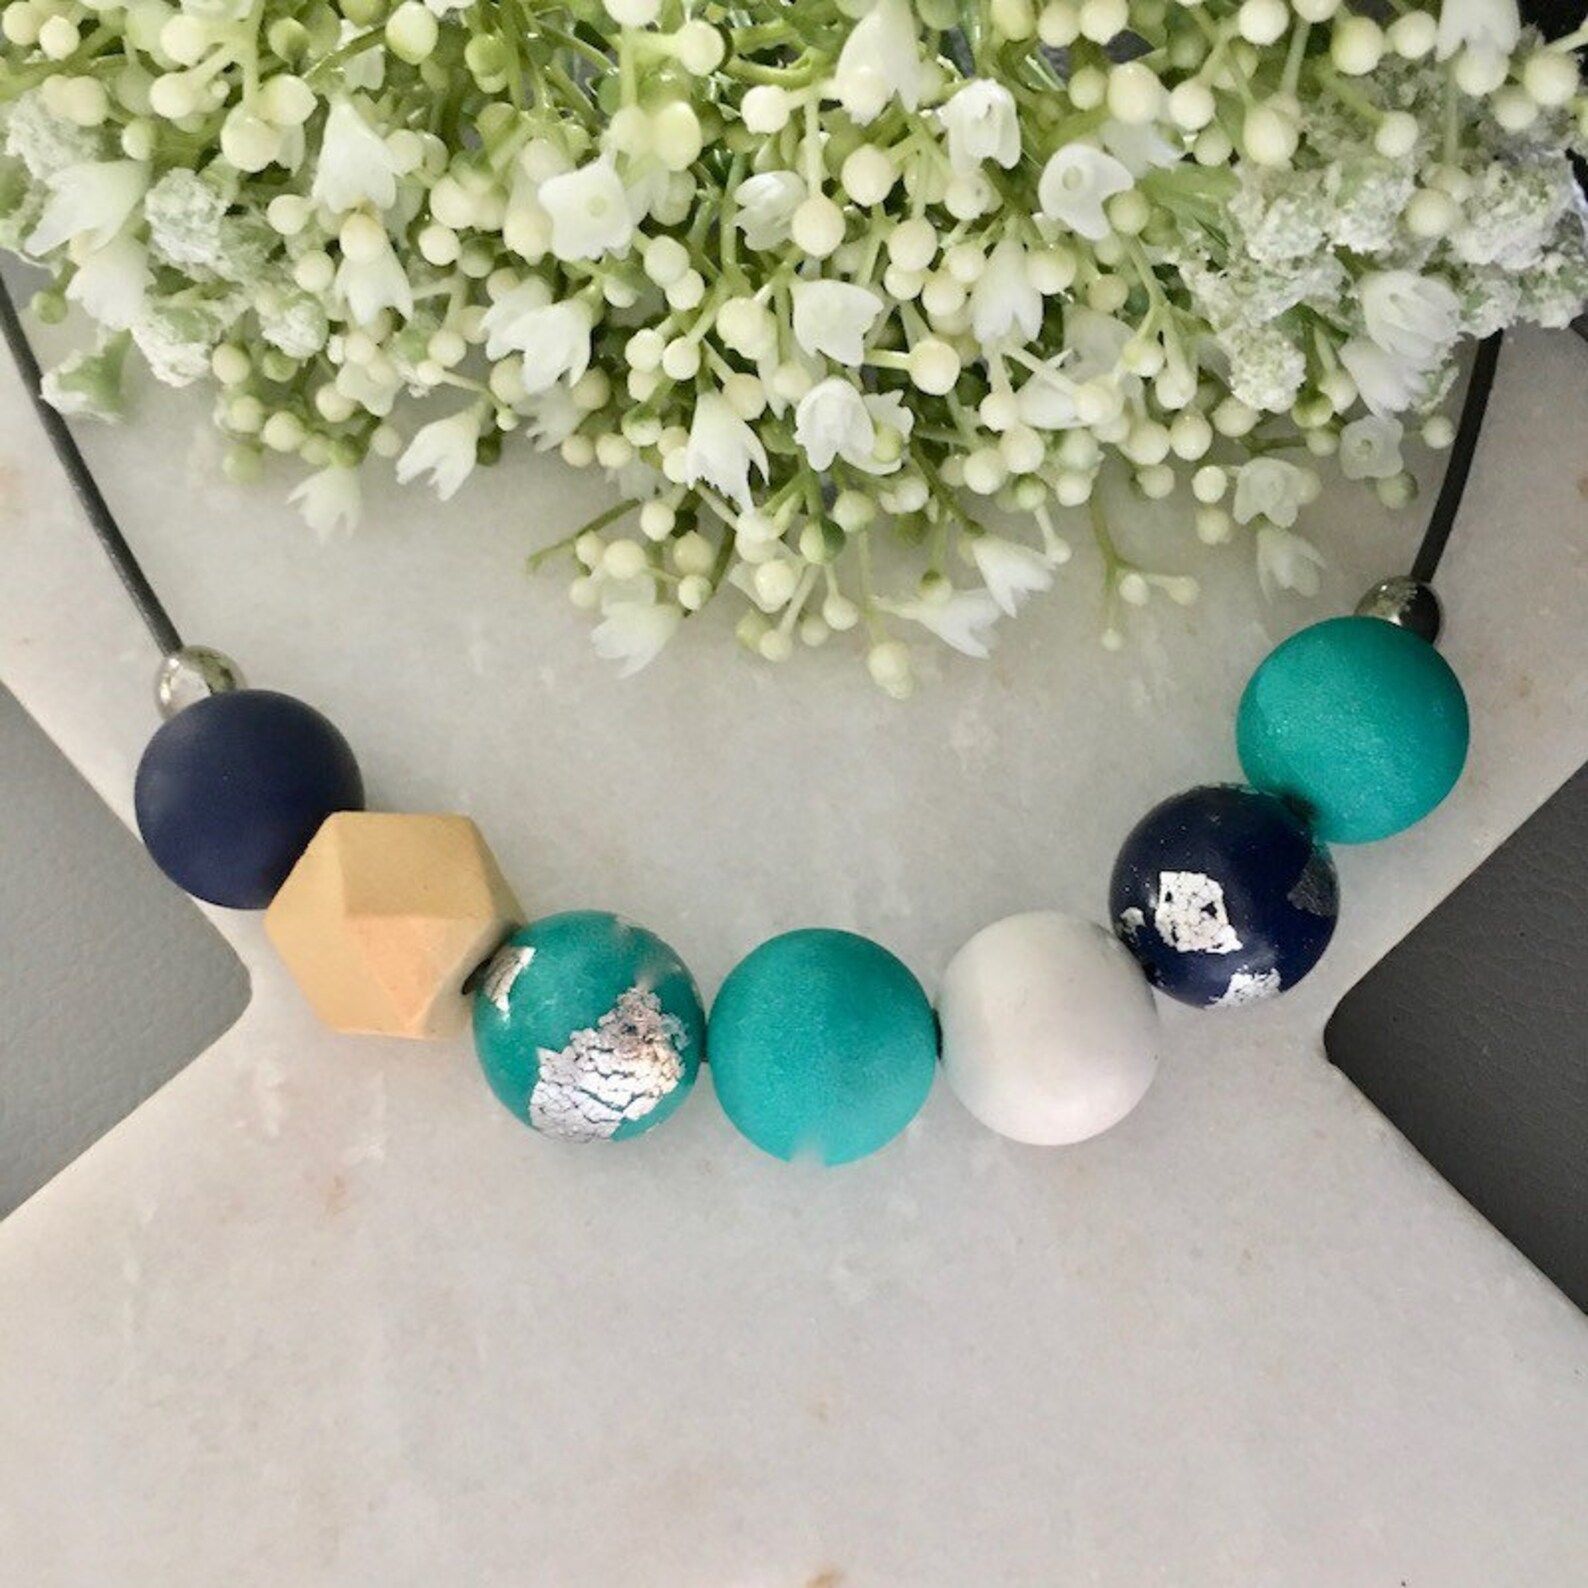 Necklace - Handmade Polymer Clay Necklace - 'ELAINE' - Teal, Navy, WHite - Free Aus SHipping. | Etsy (AU)